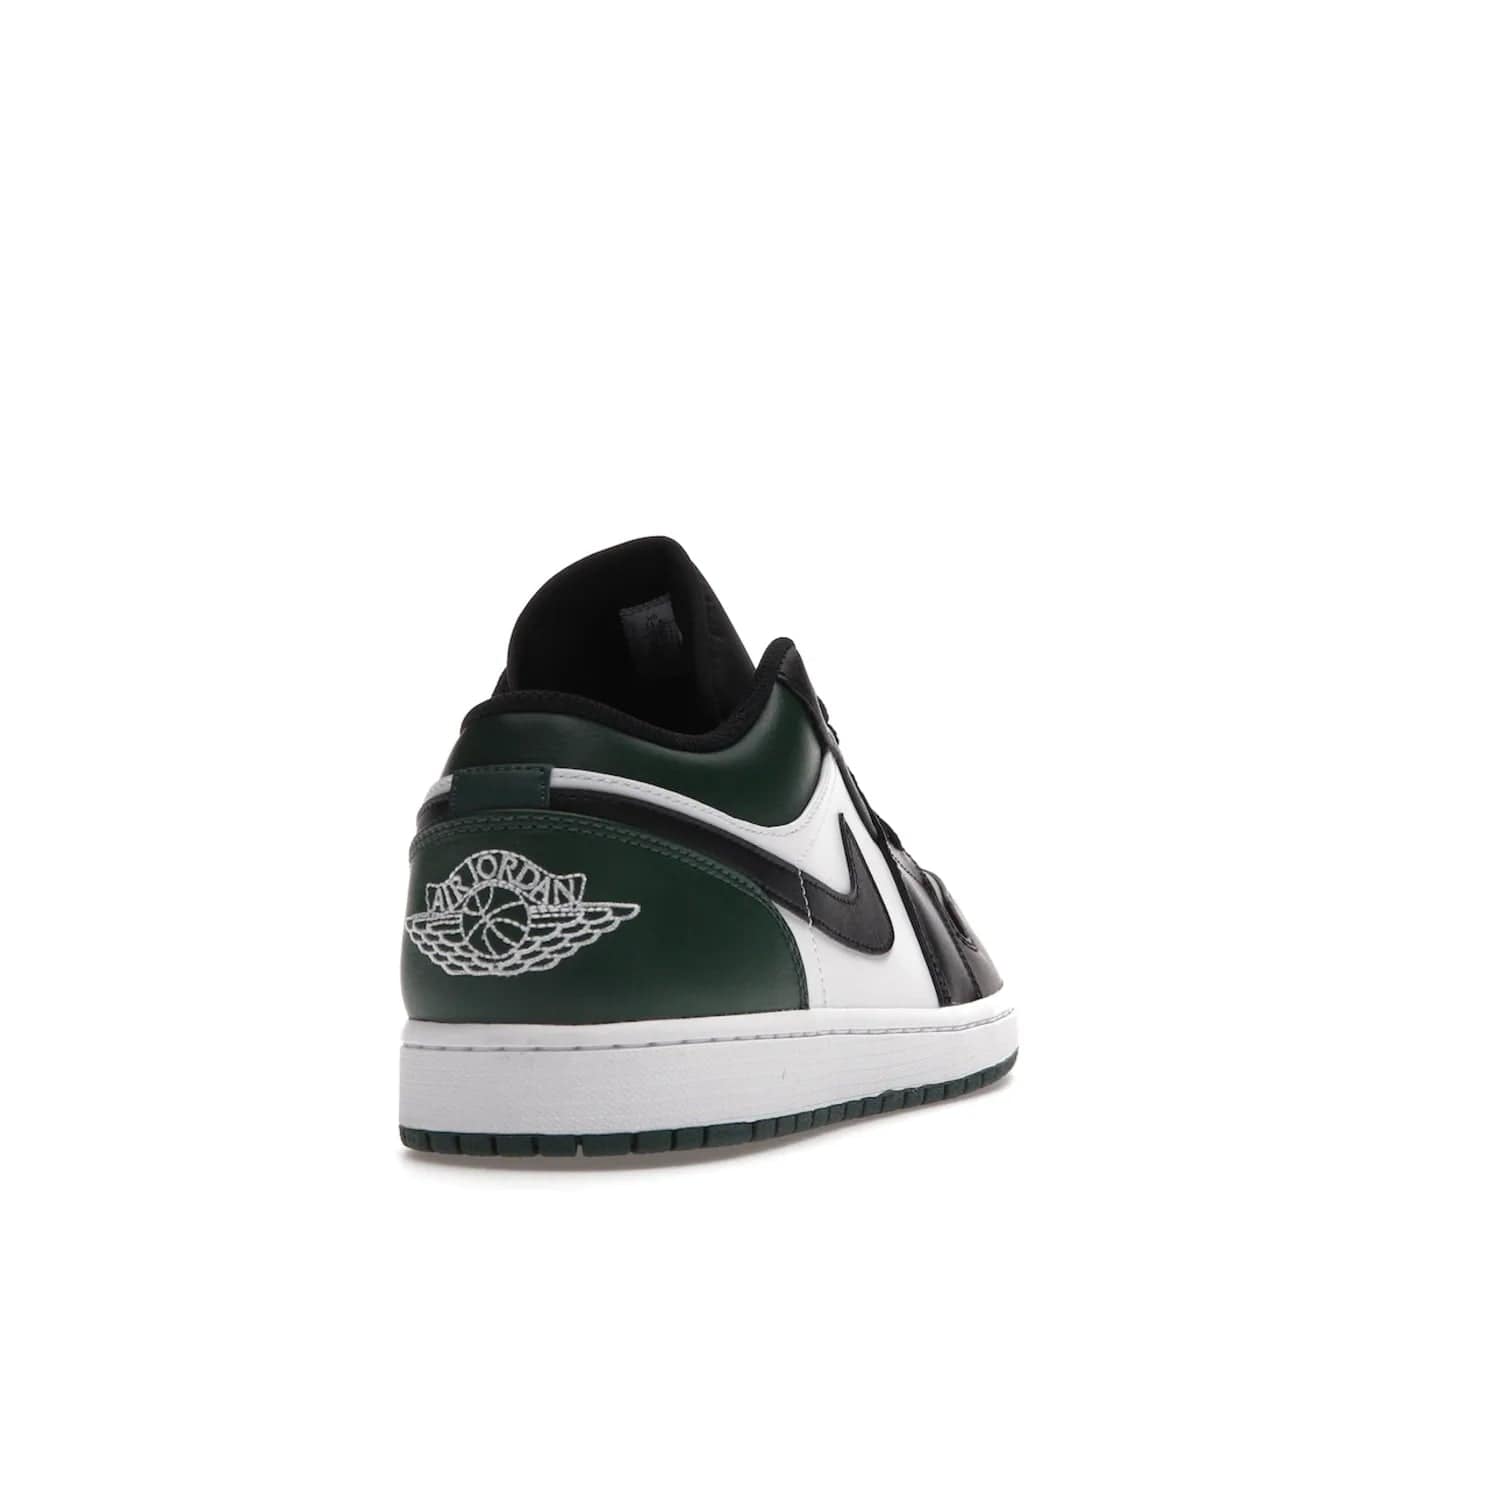 Jordan 1 Low Green Toe - Image 30 - Only at www.BallersClubKickz.com - The Jordan 1 Low Green Toe features white, black and Noble Green leather with black Swoosh. Get the classic Bred Toe-inspired color blocking with green perforated toe box. White and green Air sole completes the design. Released in October 2021 at only $100. Grab your pair now!